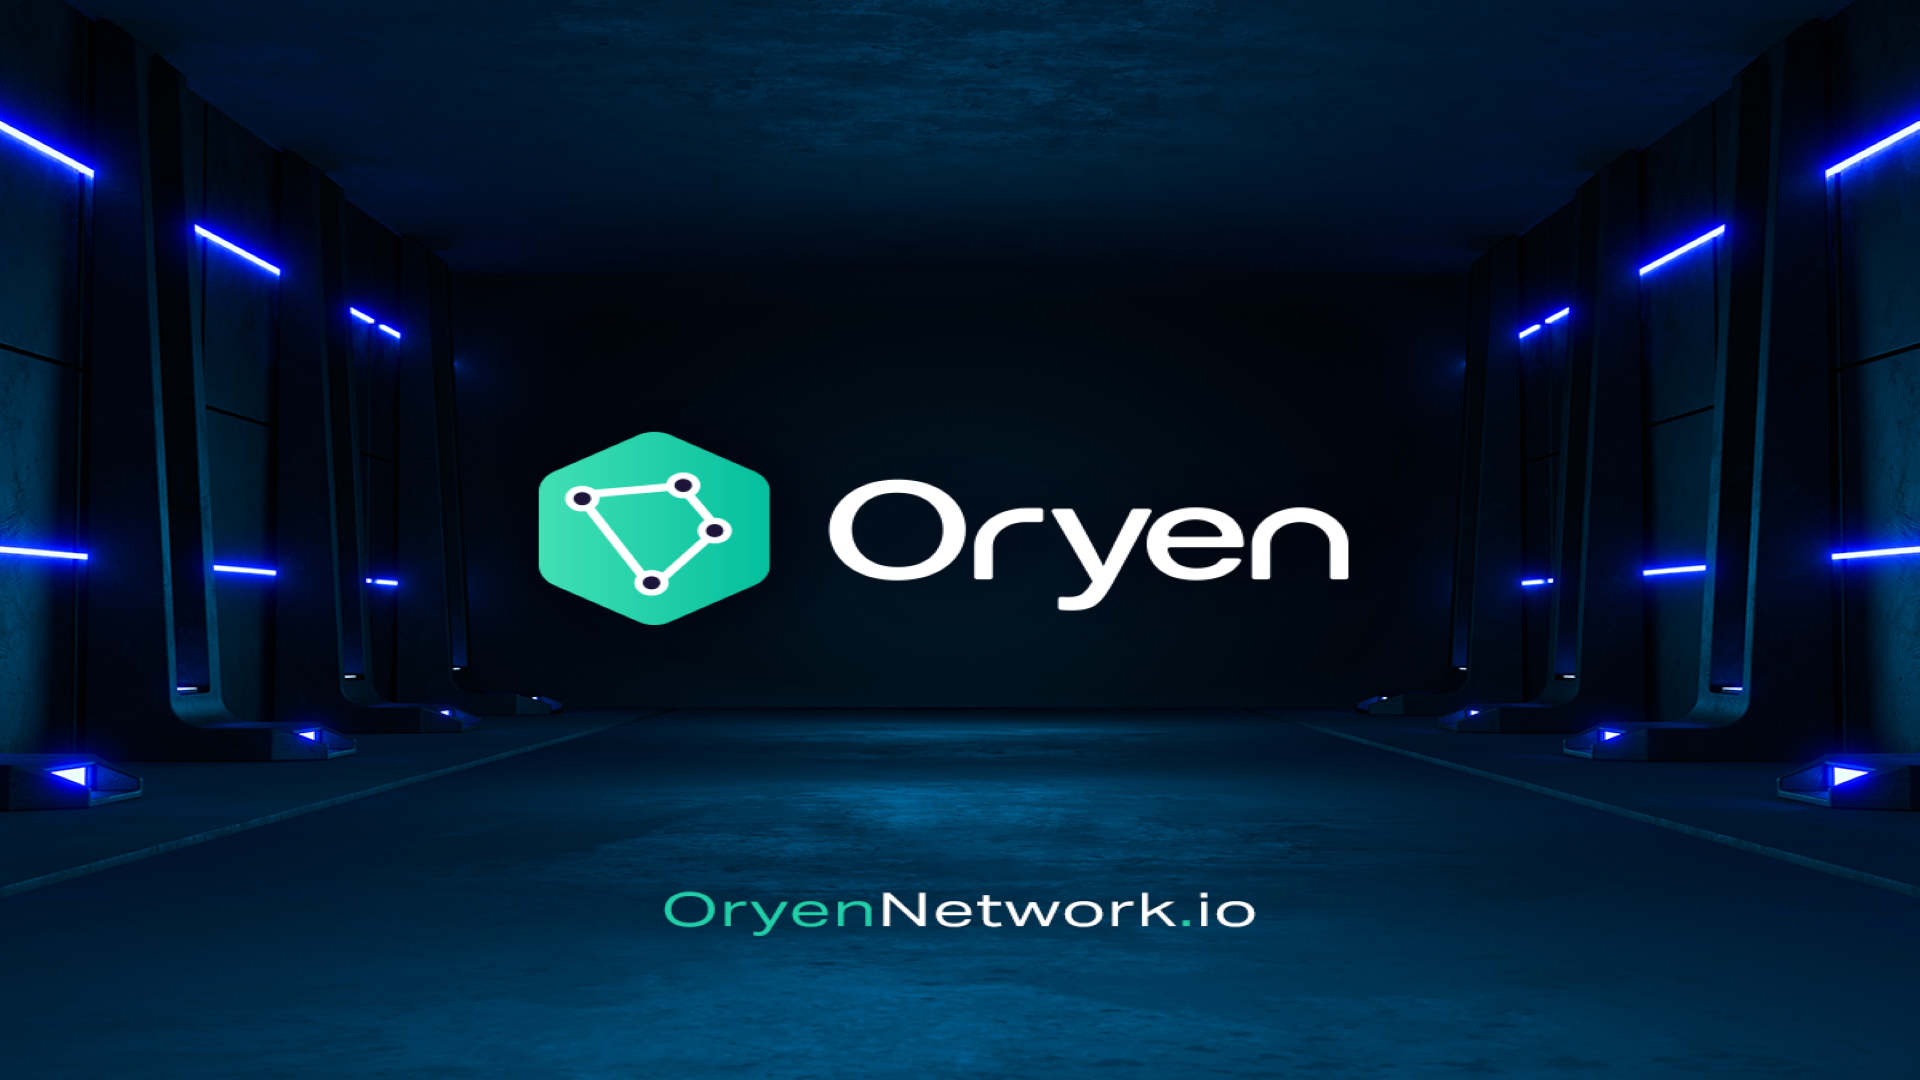 Cardano, Fantom and Avalanche are viable investments, while Oryen Network price jumps 250% during Presale